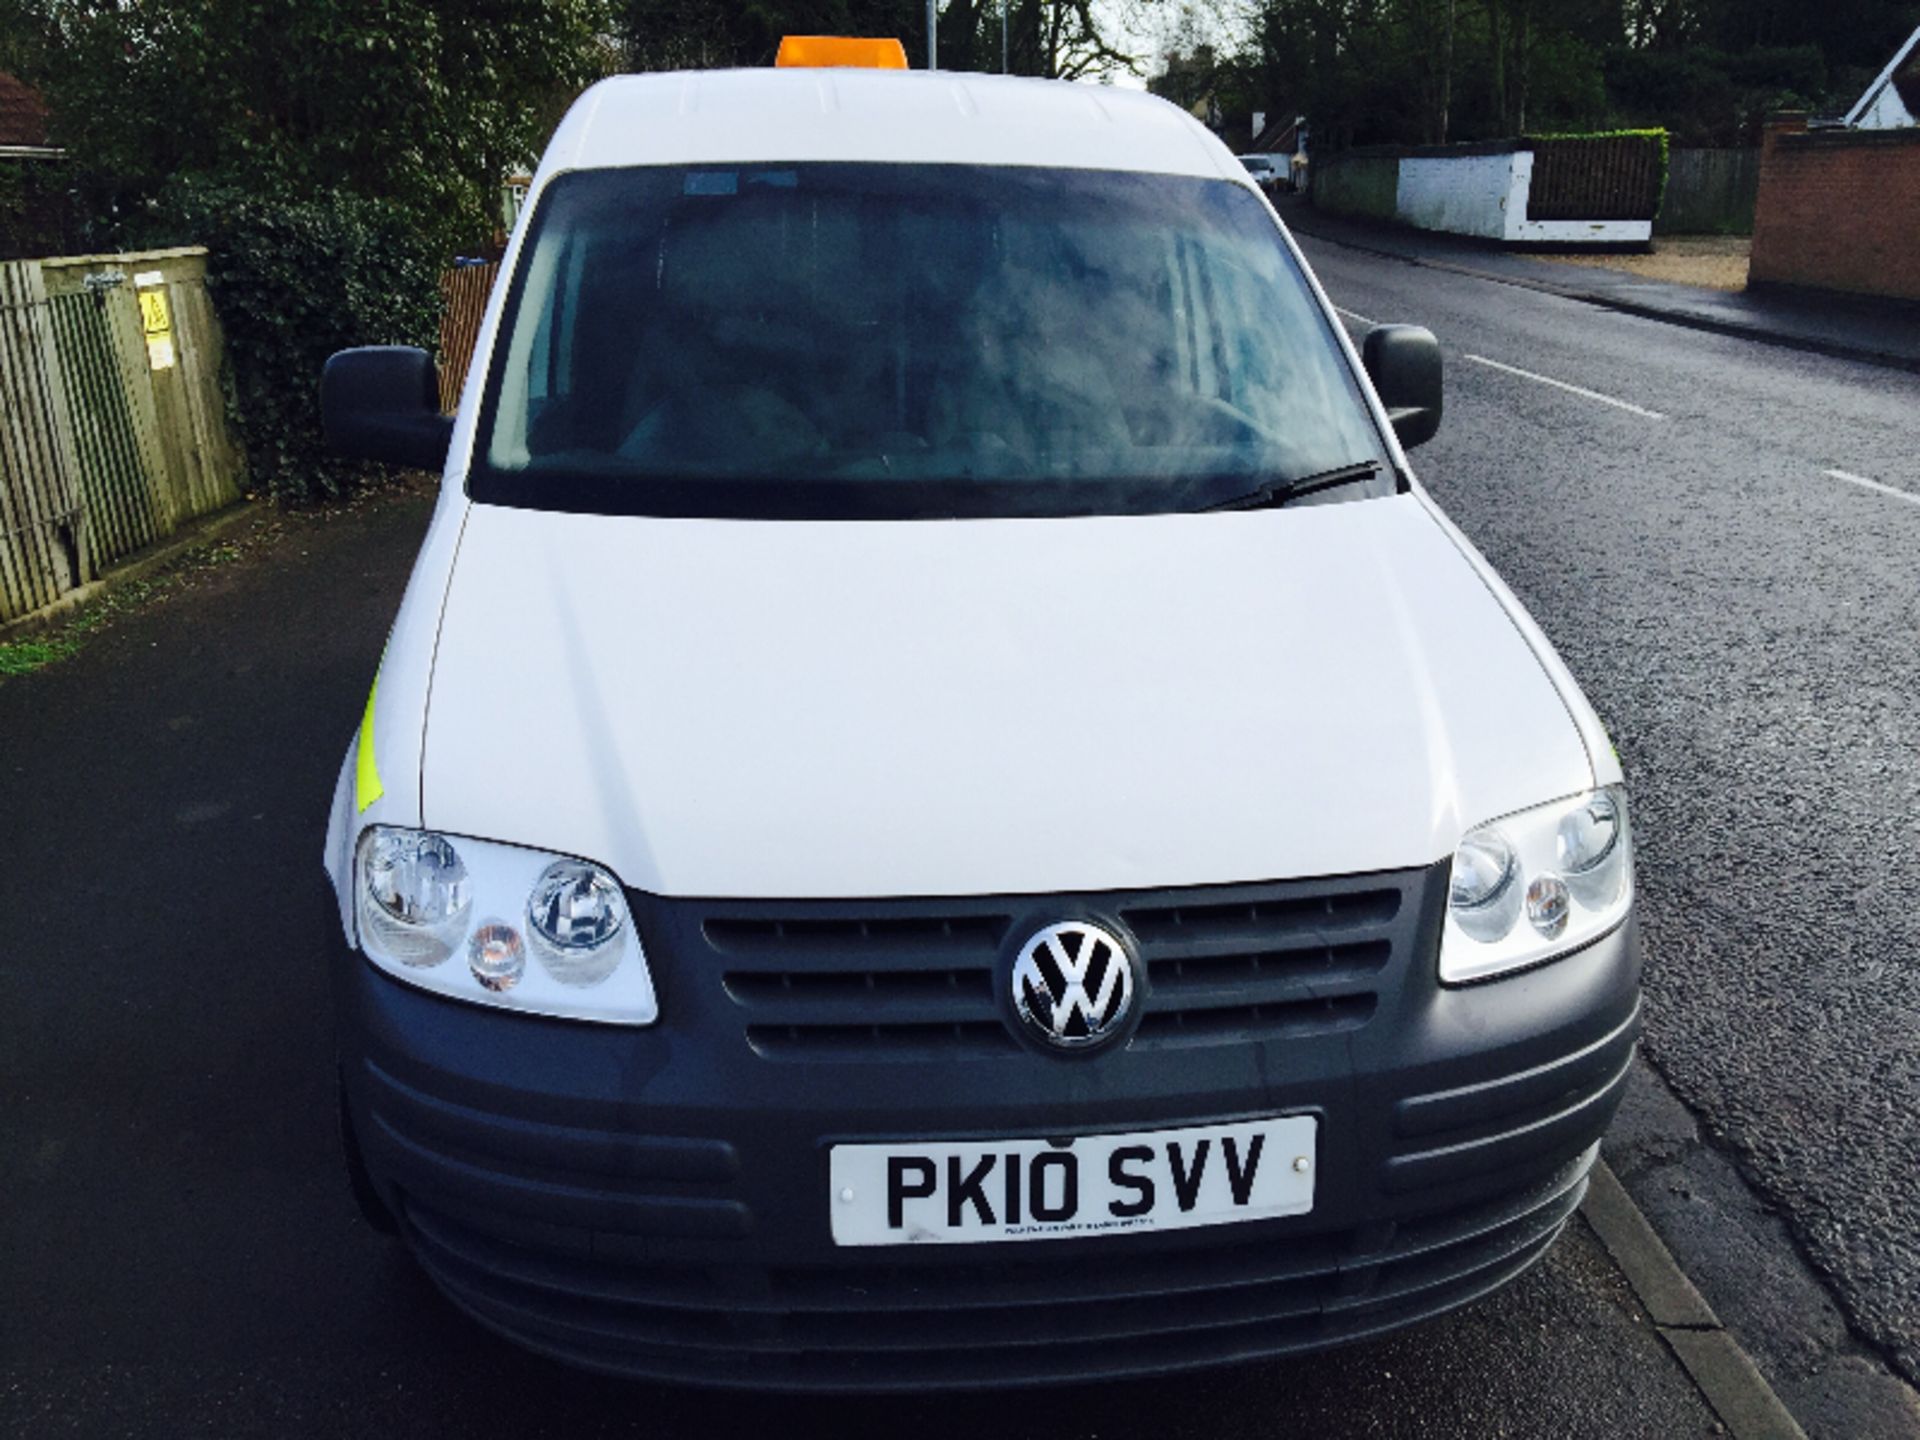 (On Sale) VW CADDY C20 TDI 104 (2010 - 10 REG) 1.9 TDI '104 PS' **FULL HISTORY** (1 OWNER FROM NEW) - Image 7 of 12